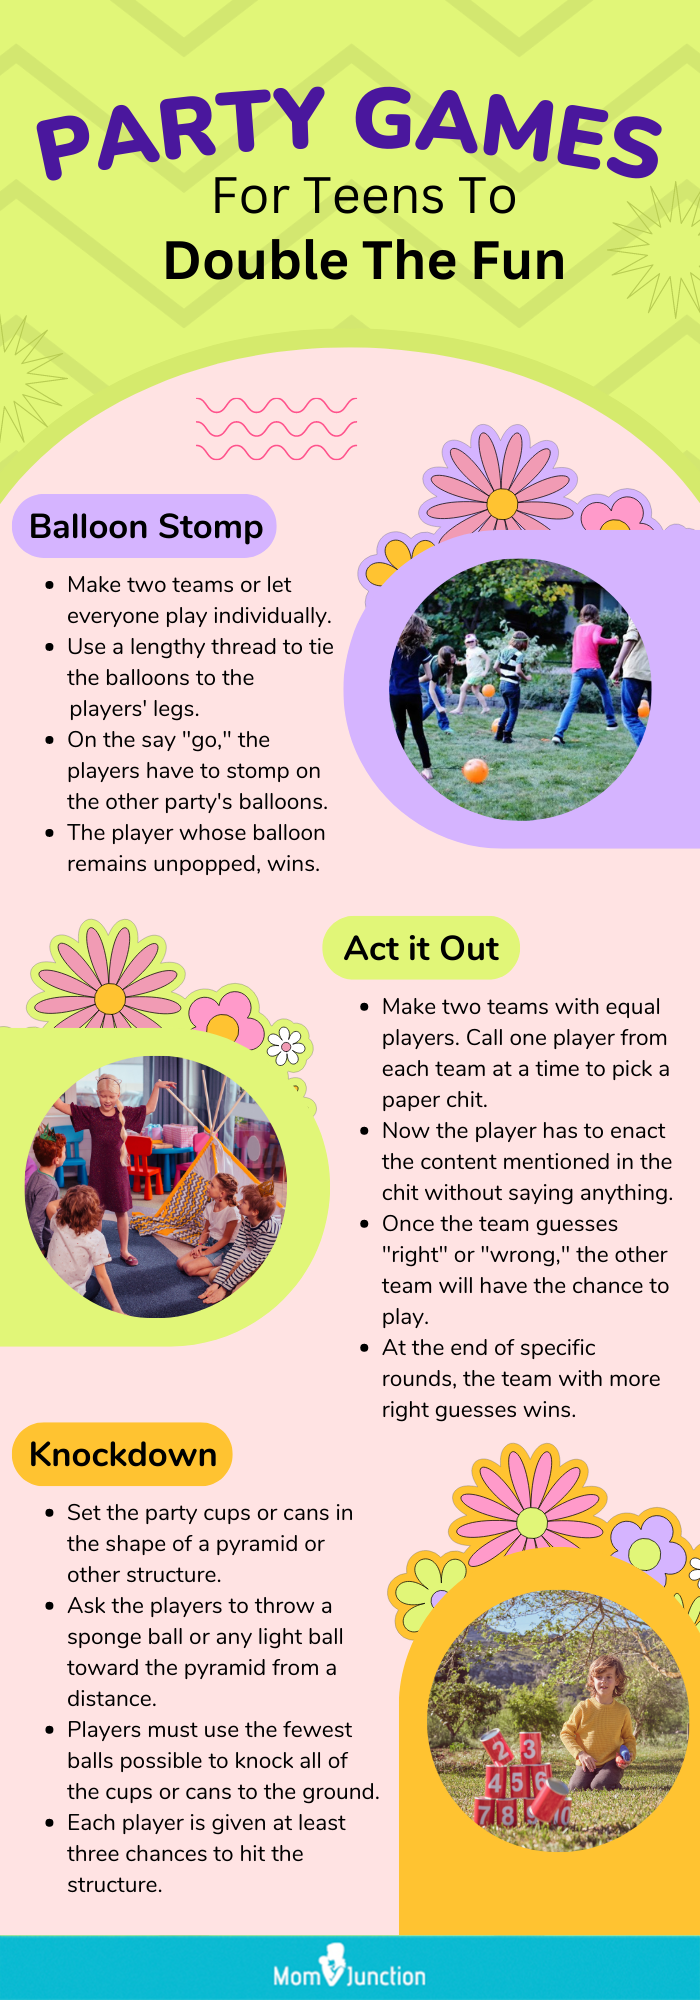 party games for teens to double the fun (infographic)